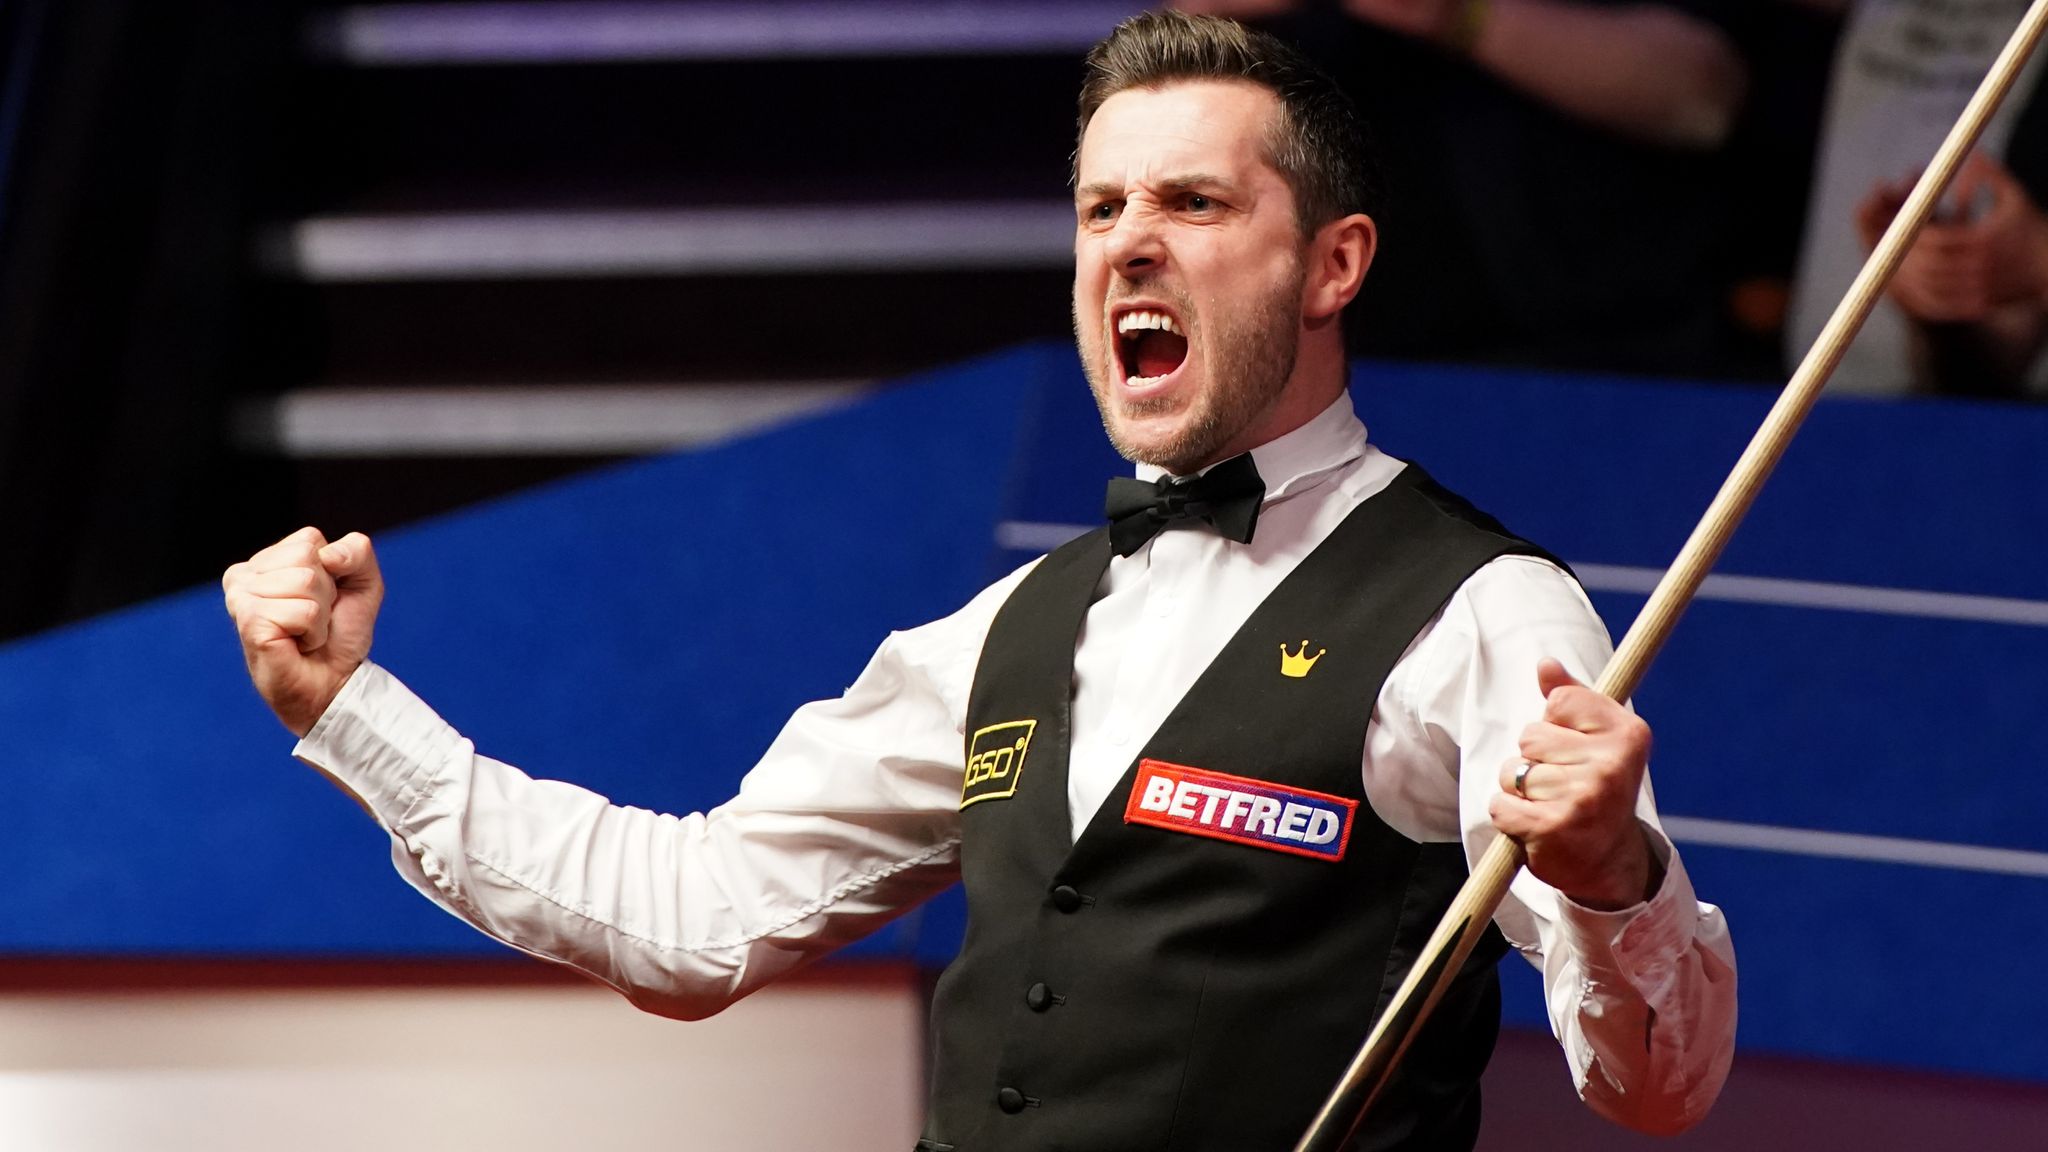 What Happened To Mark Selby, Mental Health Problems Update - What Is Wrong With Him?